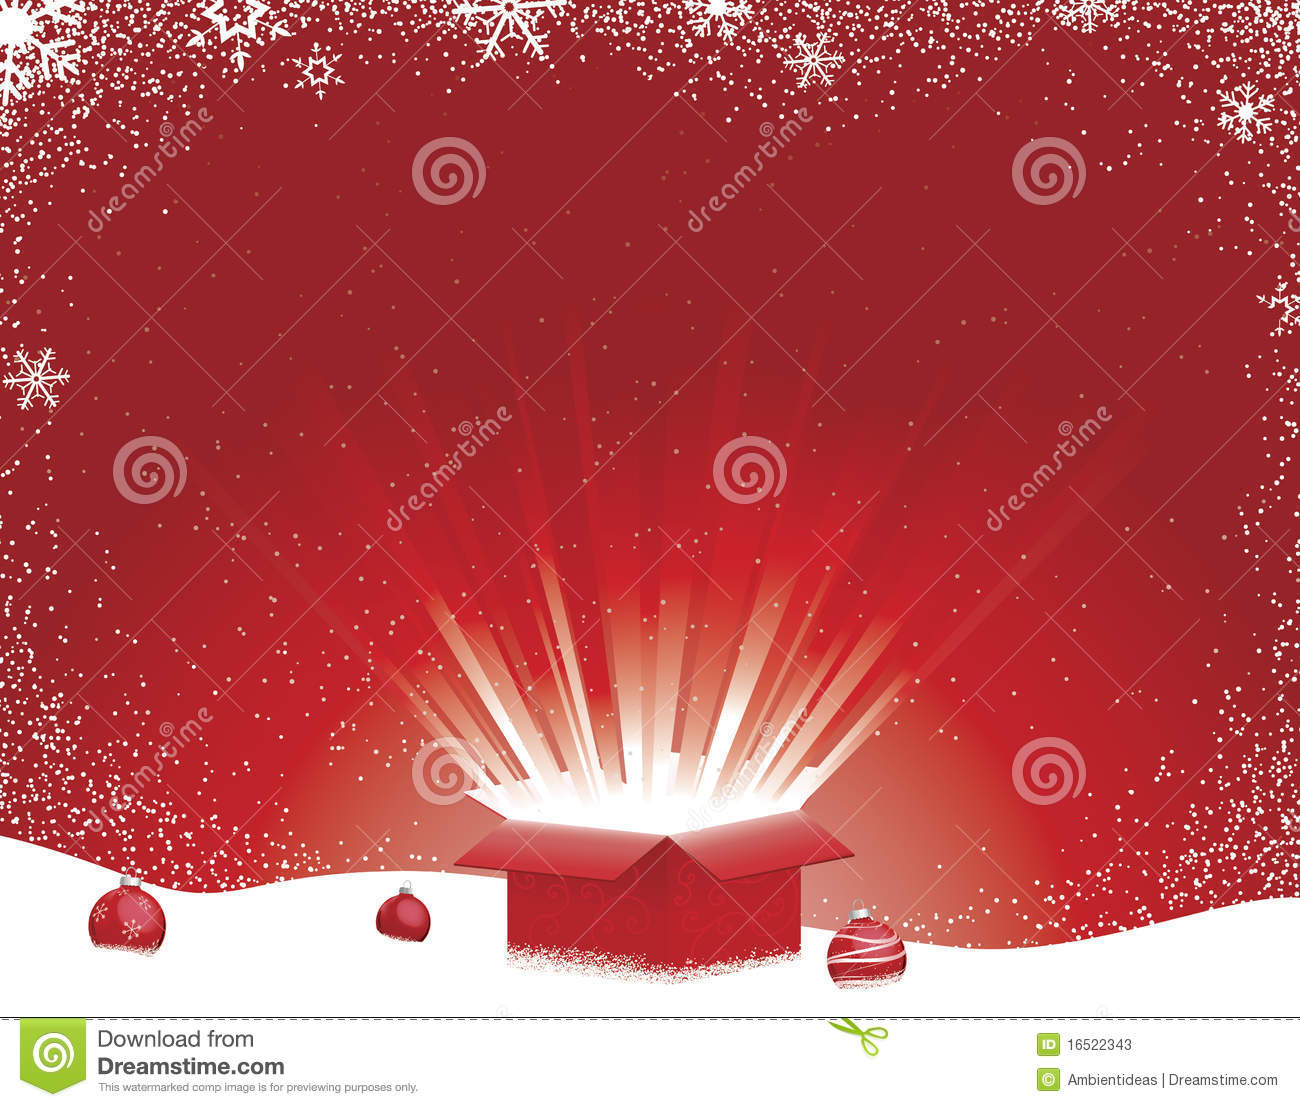 Gift Box Exploding Open With Rays Of Light On Snowflake And Snow